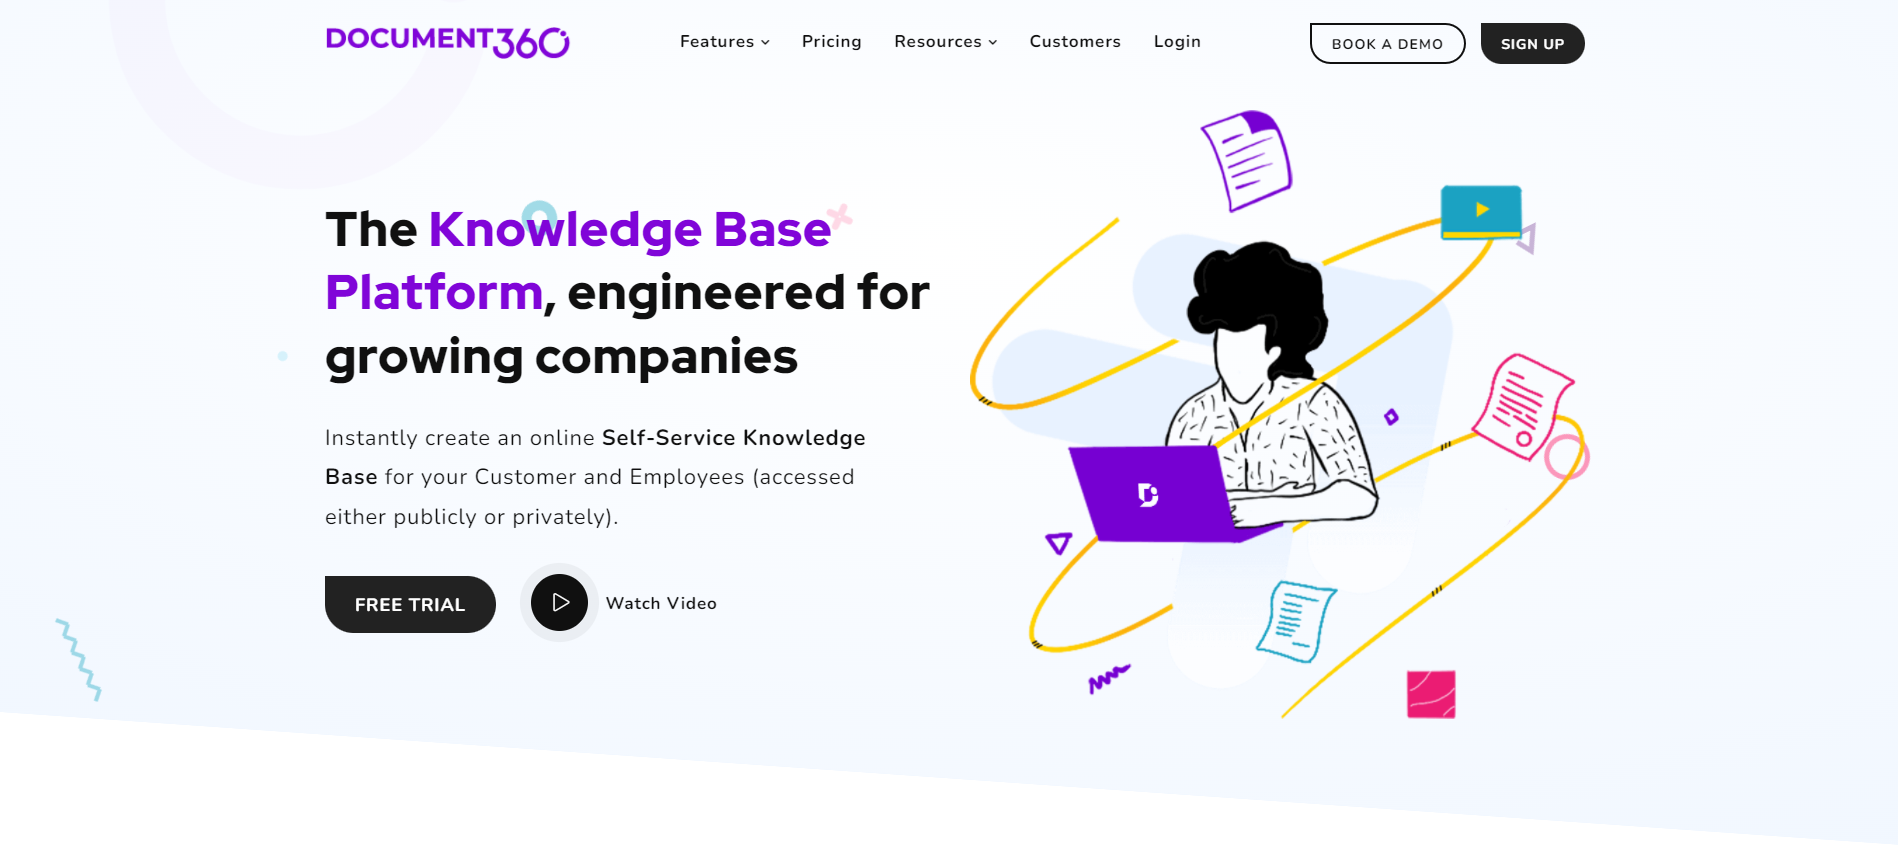 Knowledge Base Software That Scales With Your Product Document360